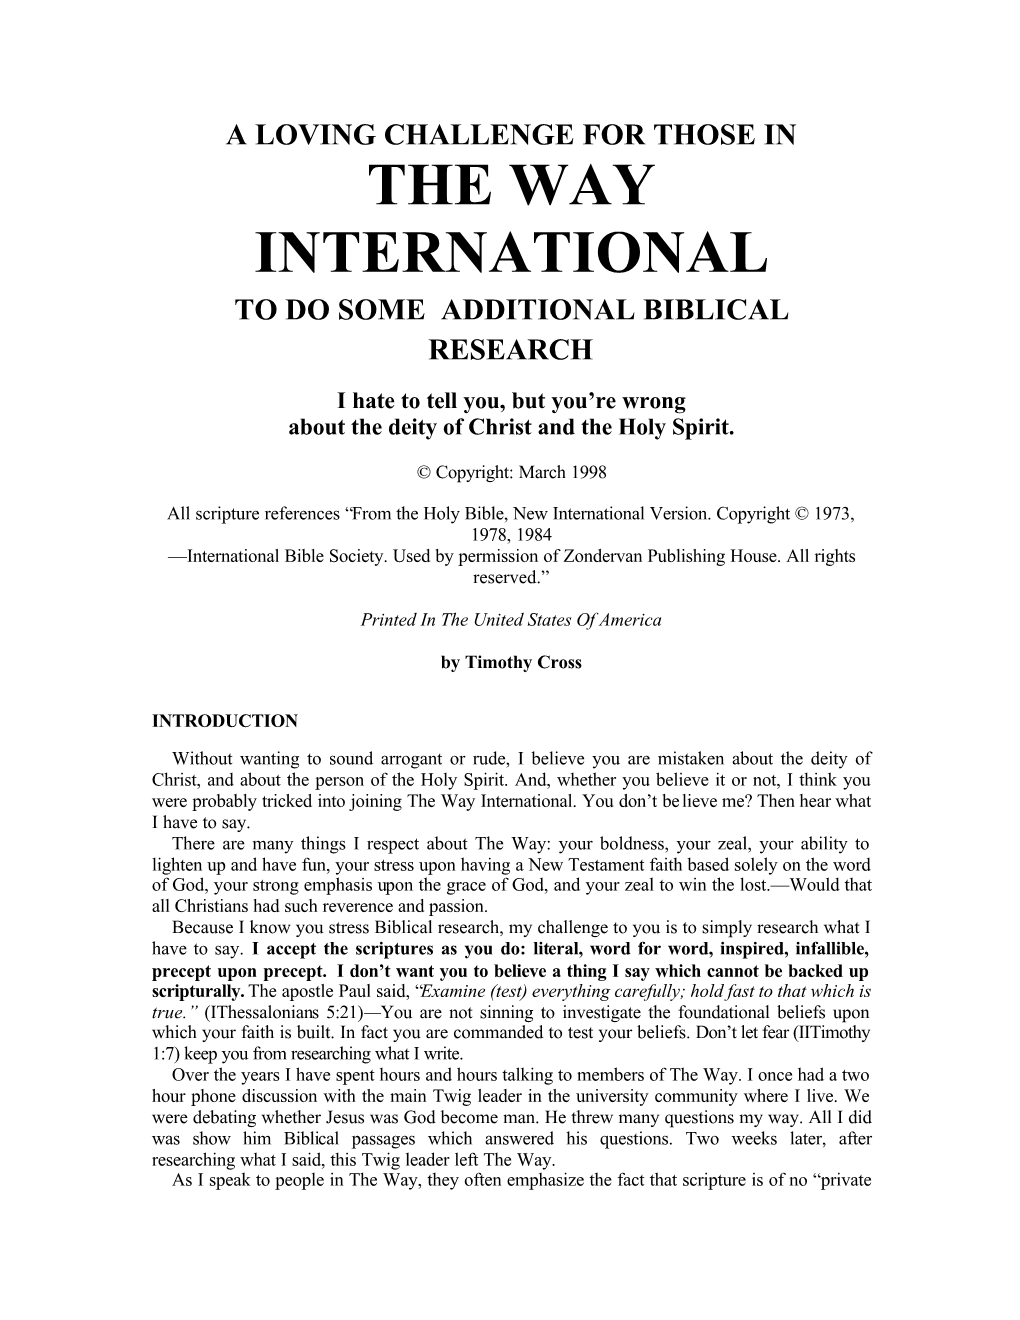 The Way International to Do Some Additional Biblical Research